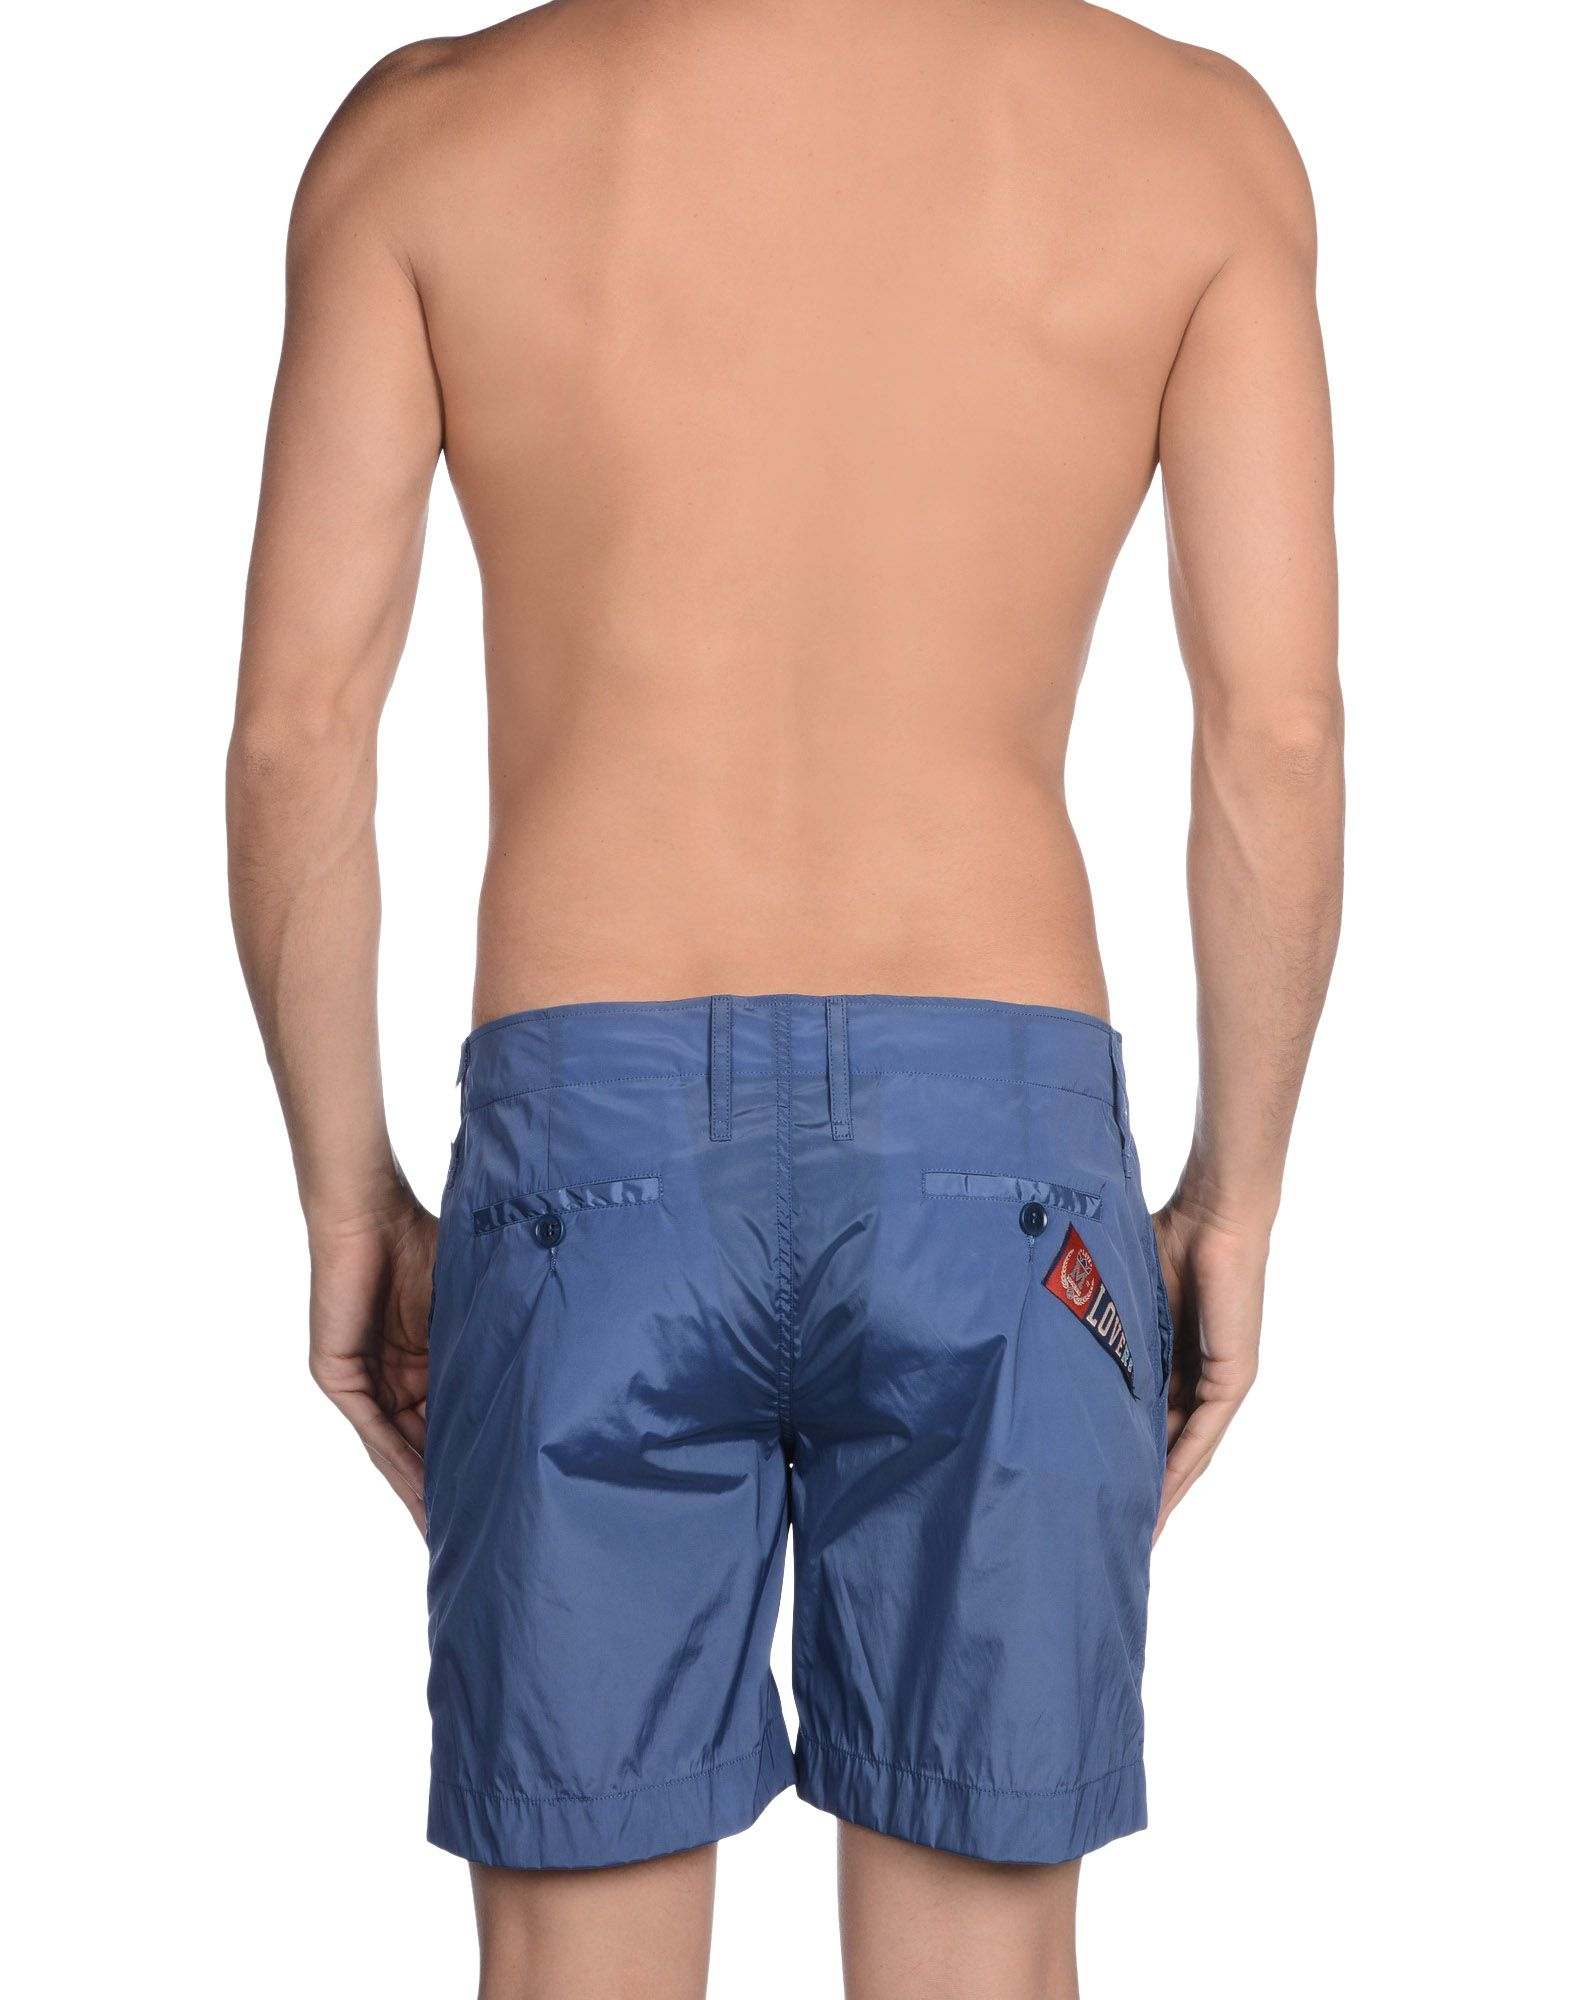 Lyst - Love Moschino Bermuda Shorts in Blue for Men